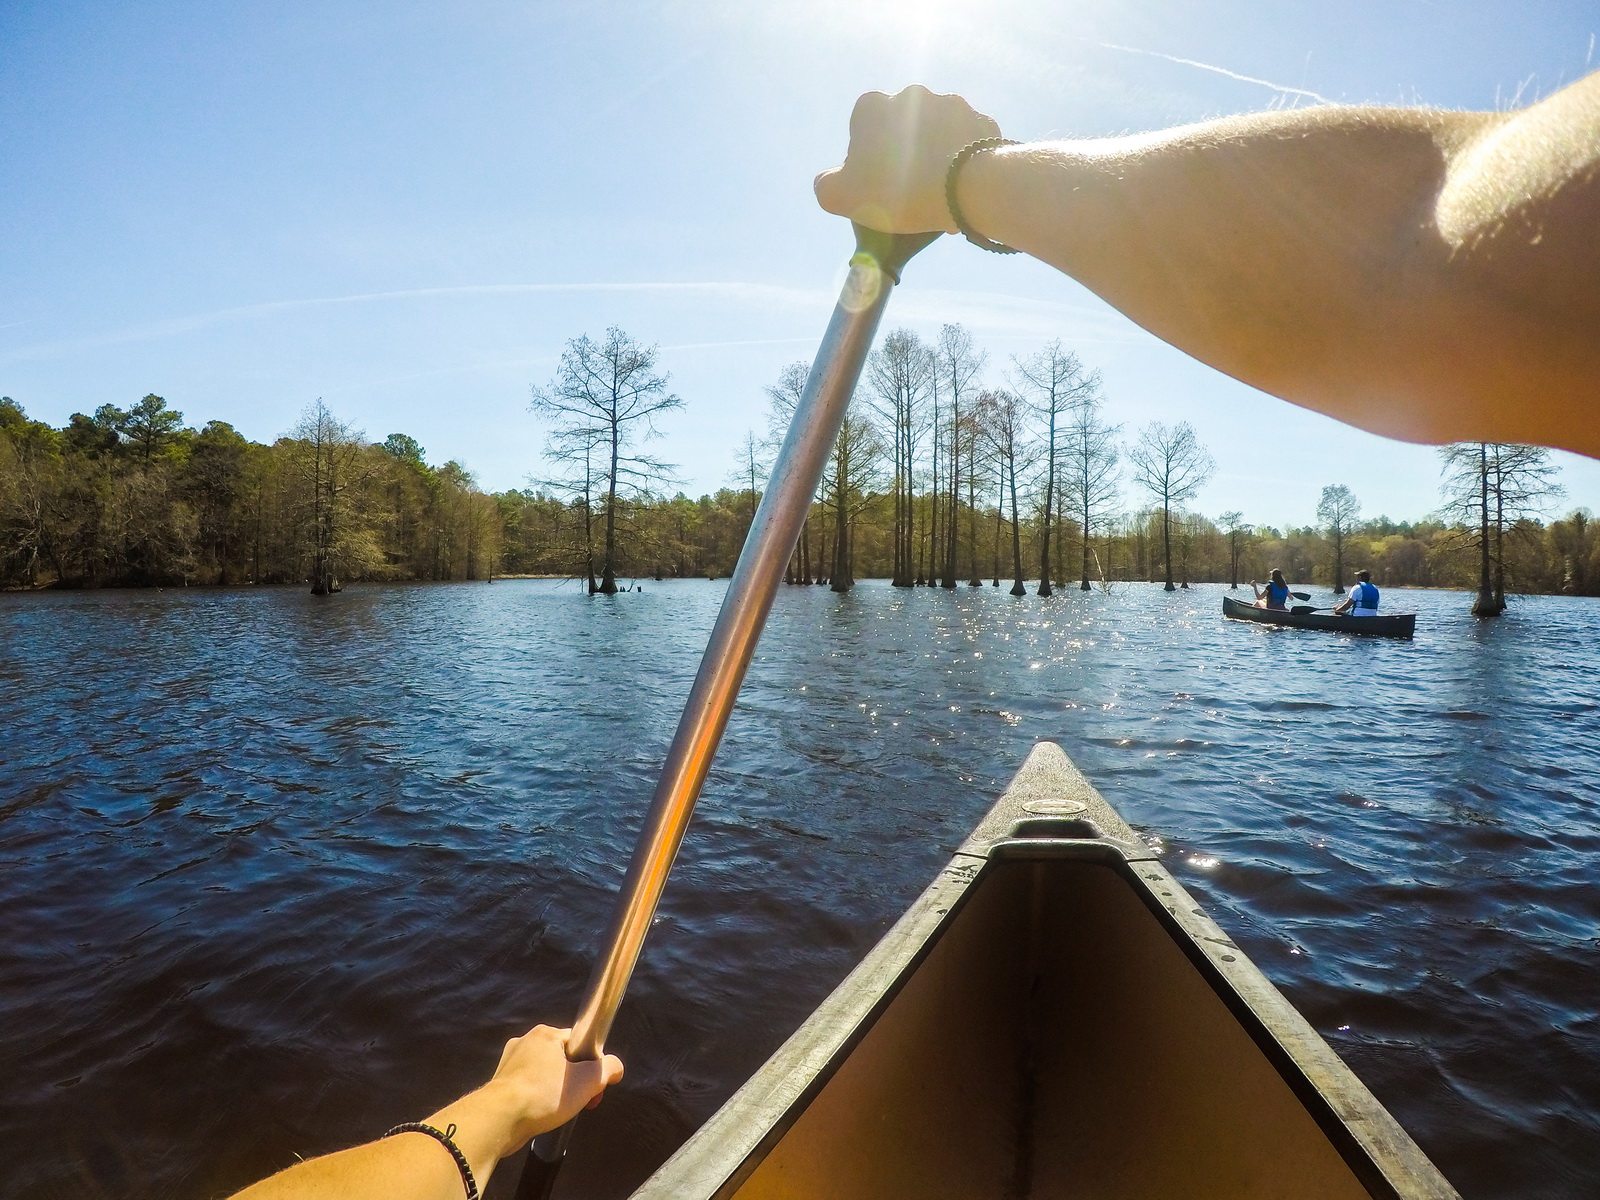 Canoing and kayaking are popular at Trap Pond State Park